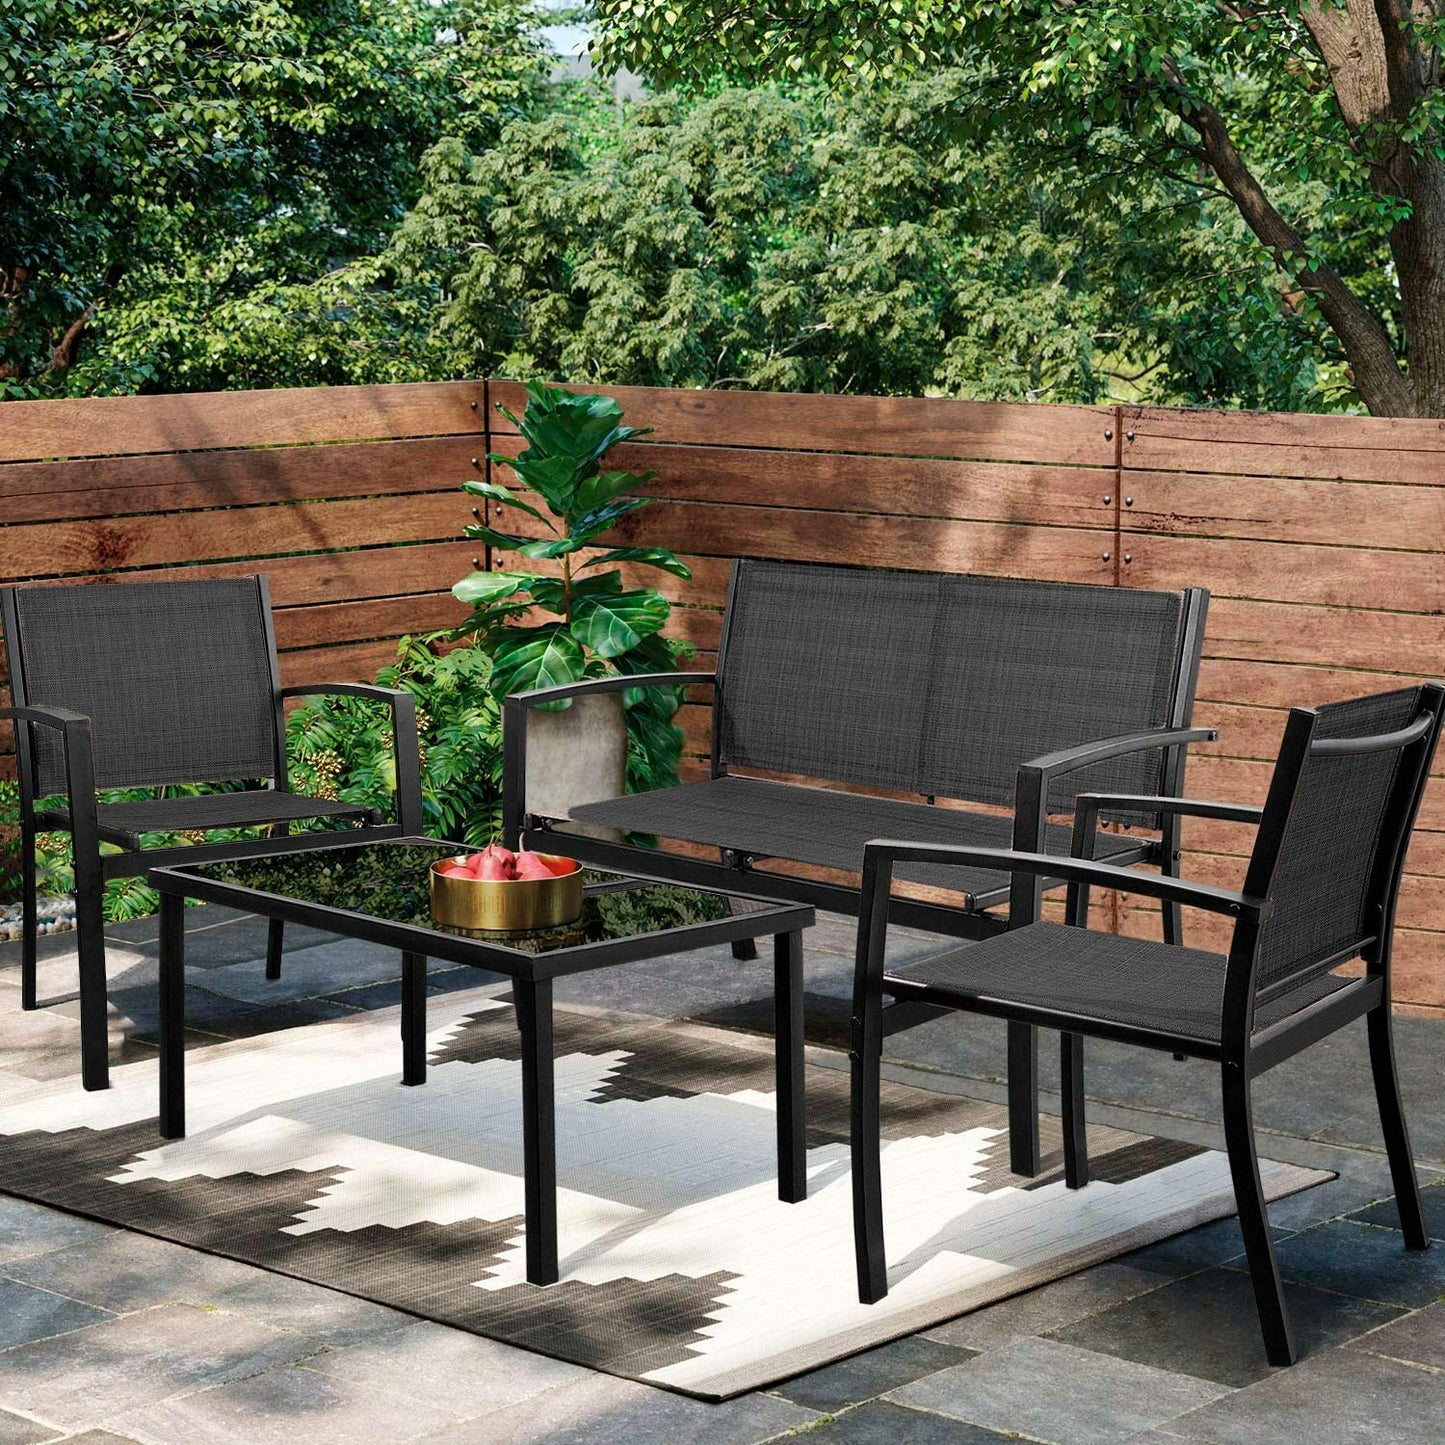 4 Pieces Patio Furniture Set, Outdoor Conversation Sets for Patio, Lawn, Garden, Poolside with A Glass Coffee Table